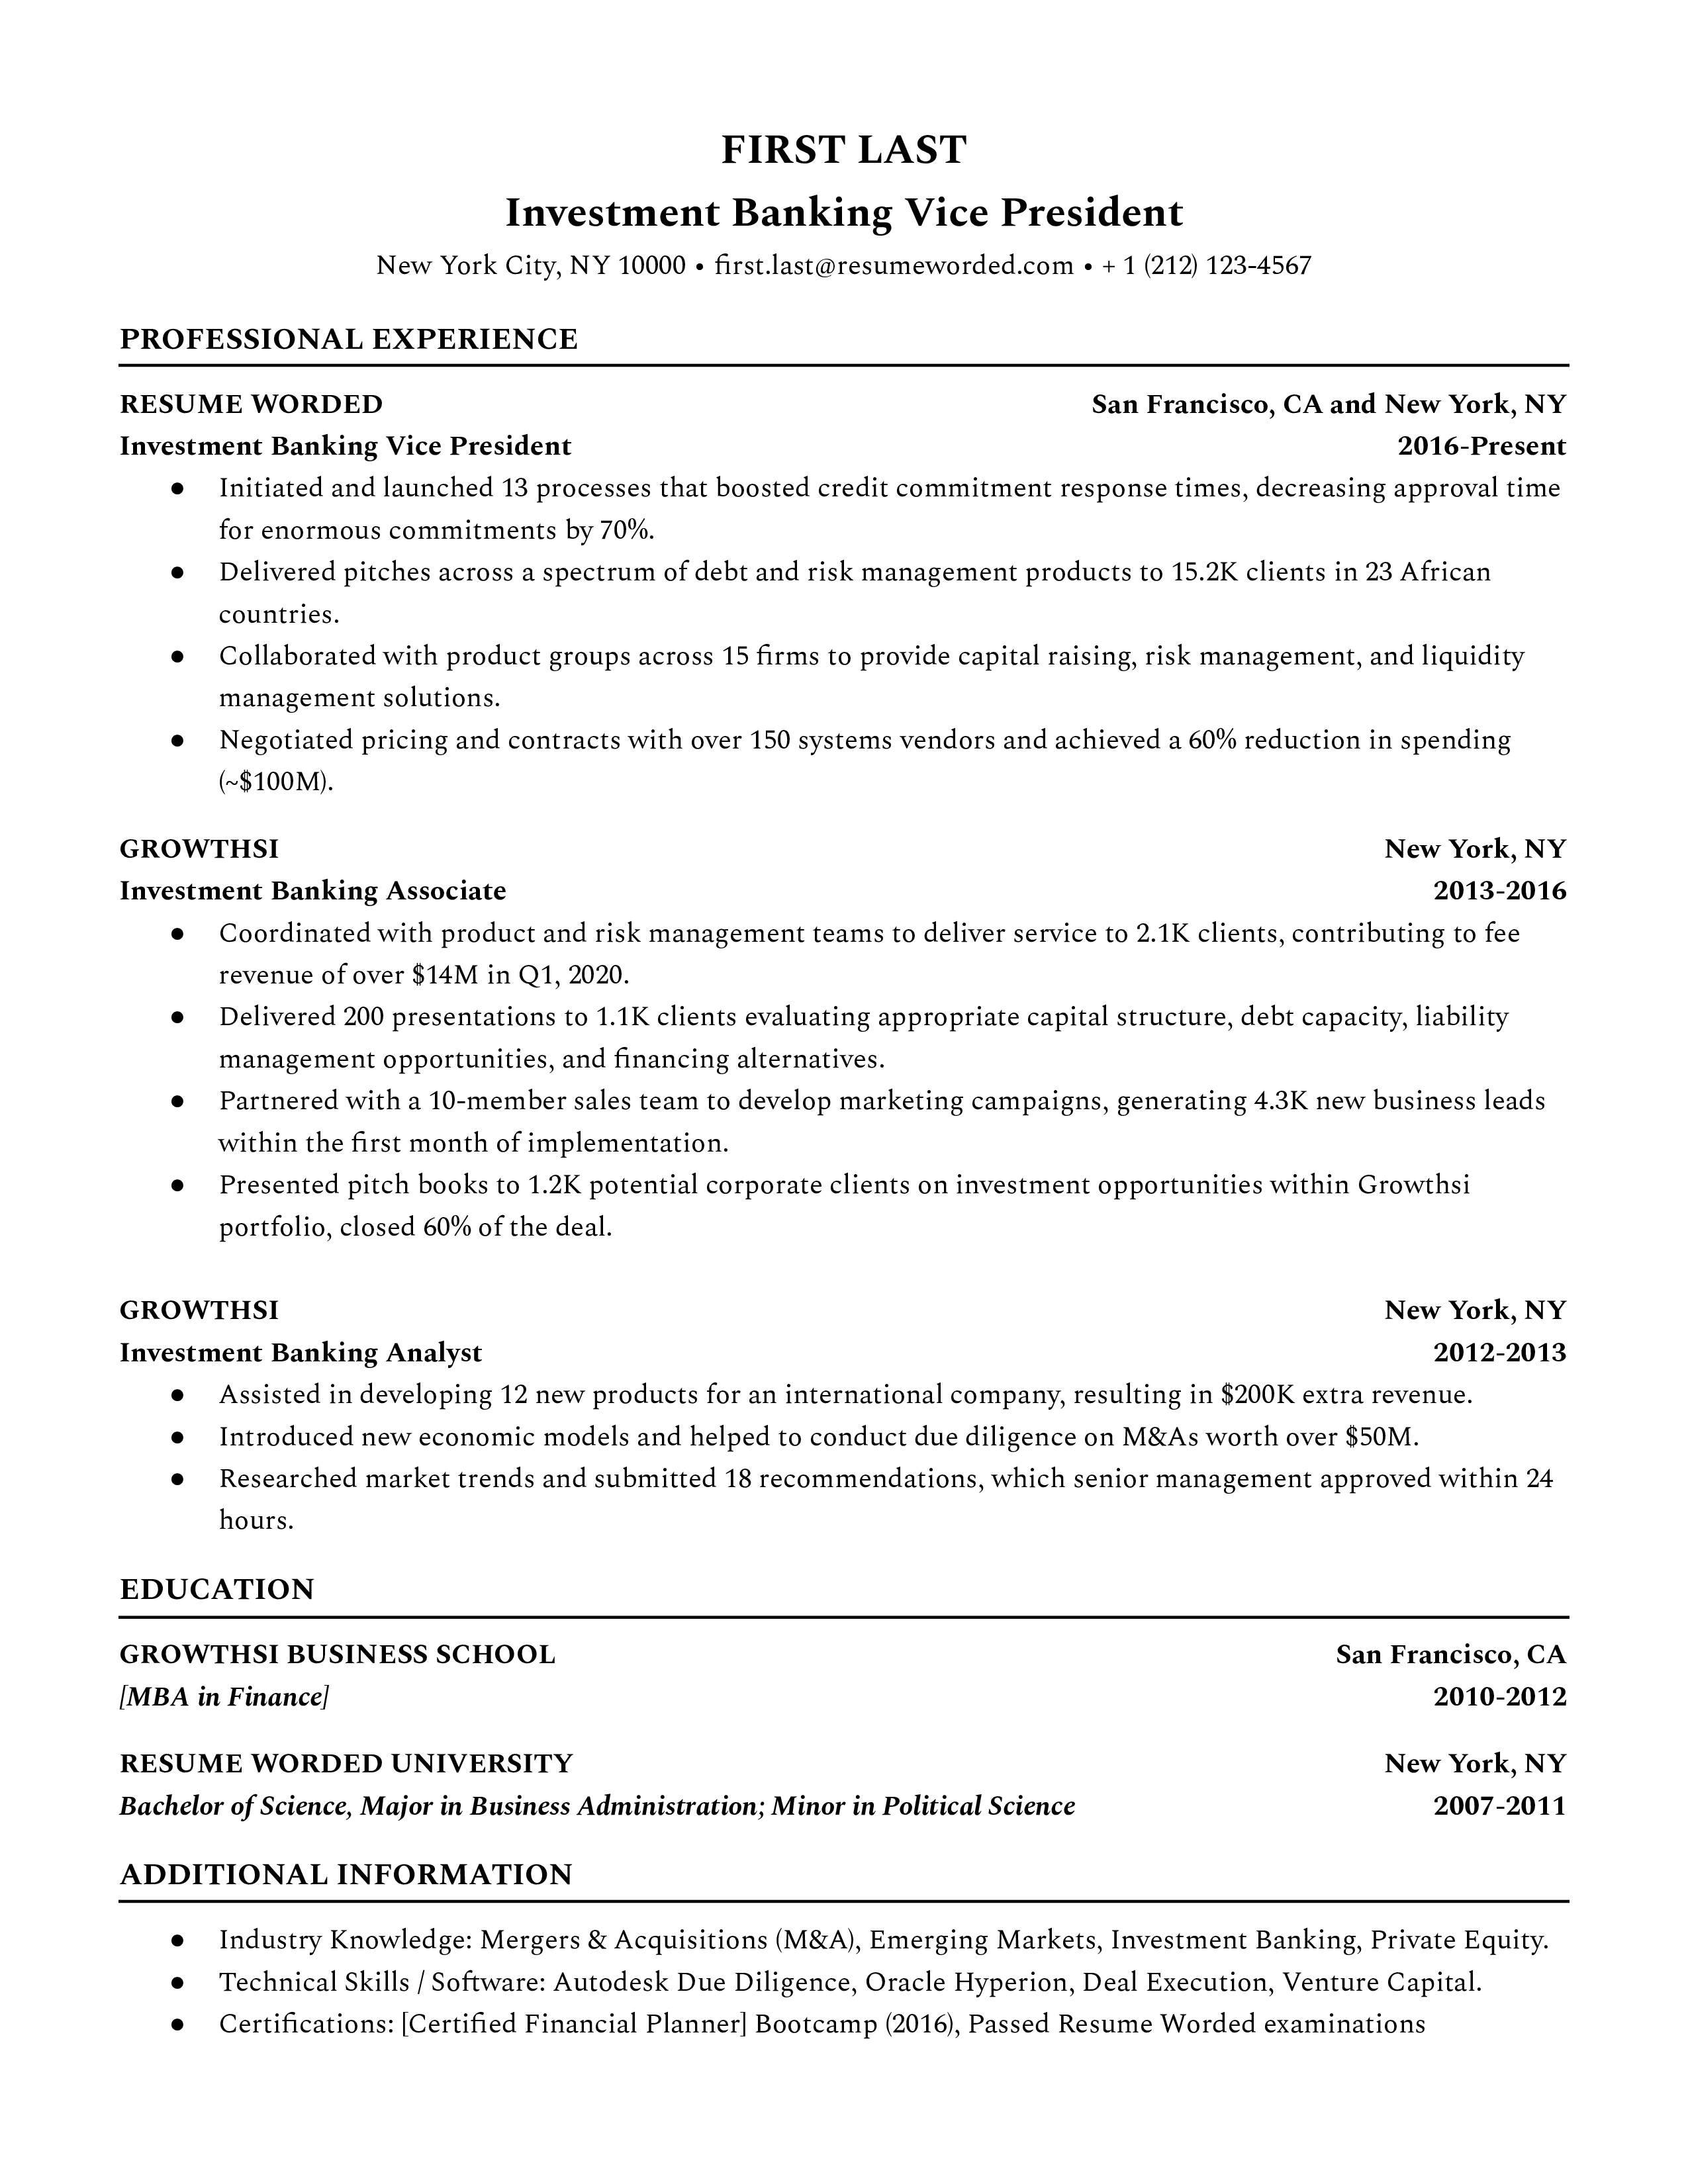 A professional CV for an Investment Banking VP role, showcasing leadership skills and financial acumen.